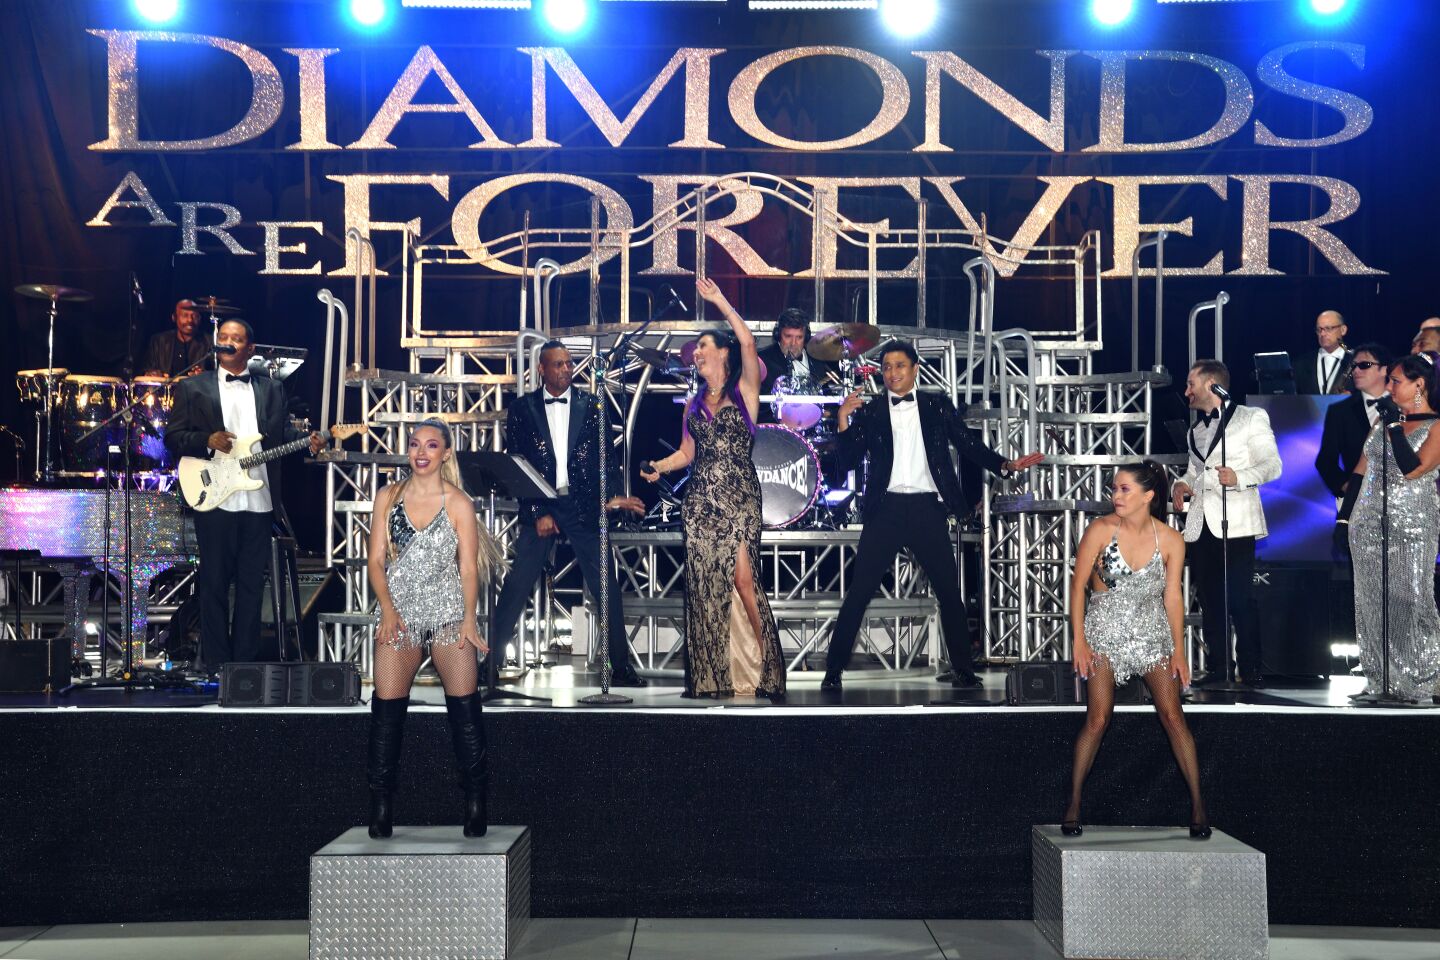 Jacqueline Foster and her Showdance performers take the stage at Las Patronas' 75th Jewel Ball, themed “Diamonds Are Forever," on Aug. 7 at the La Jolla Beach & Tennis Club.